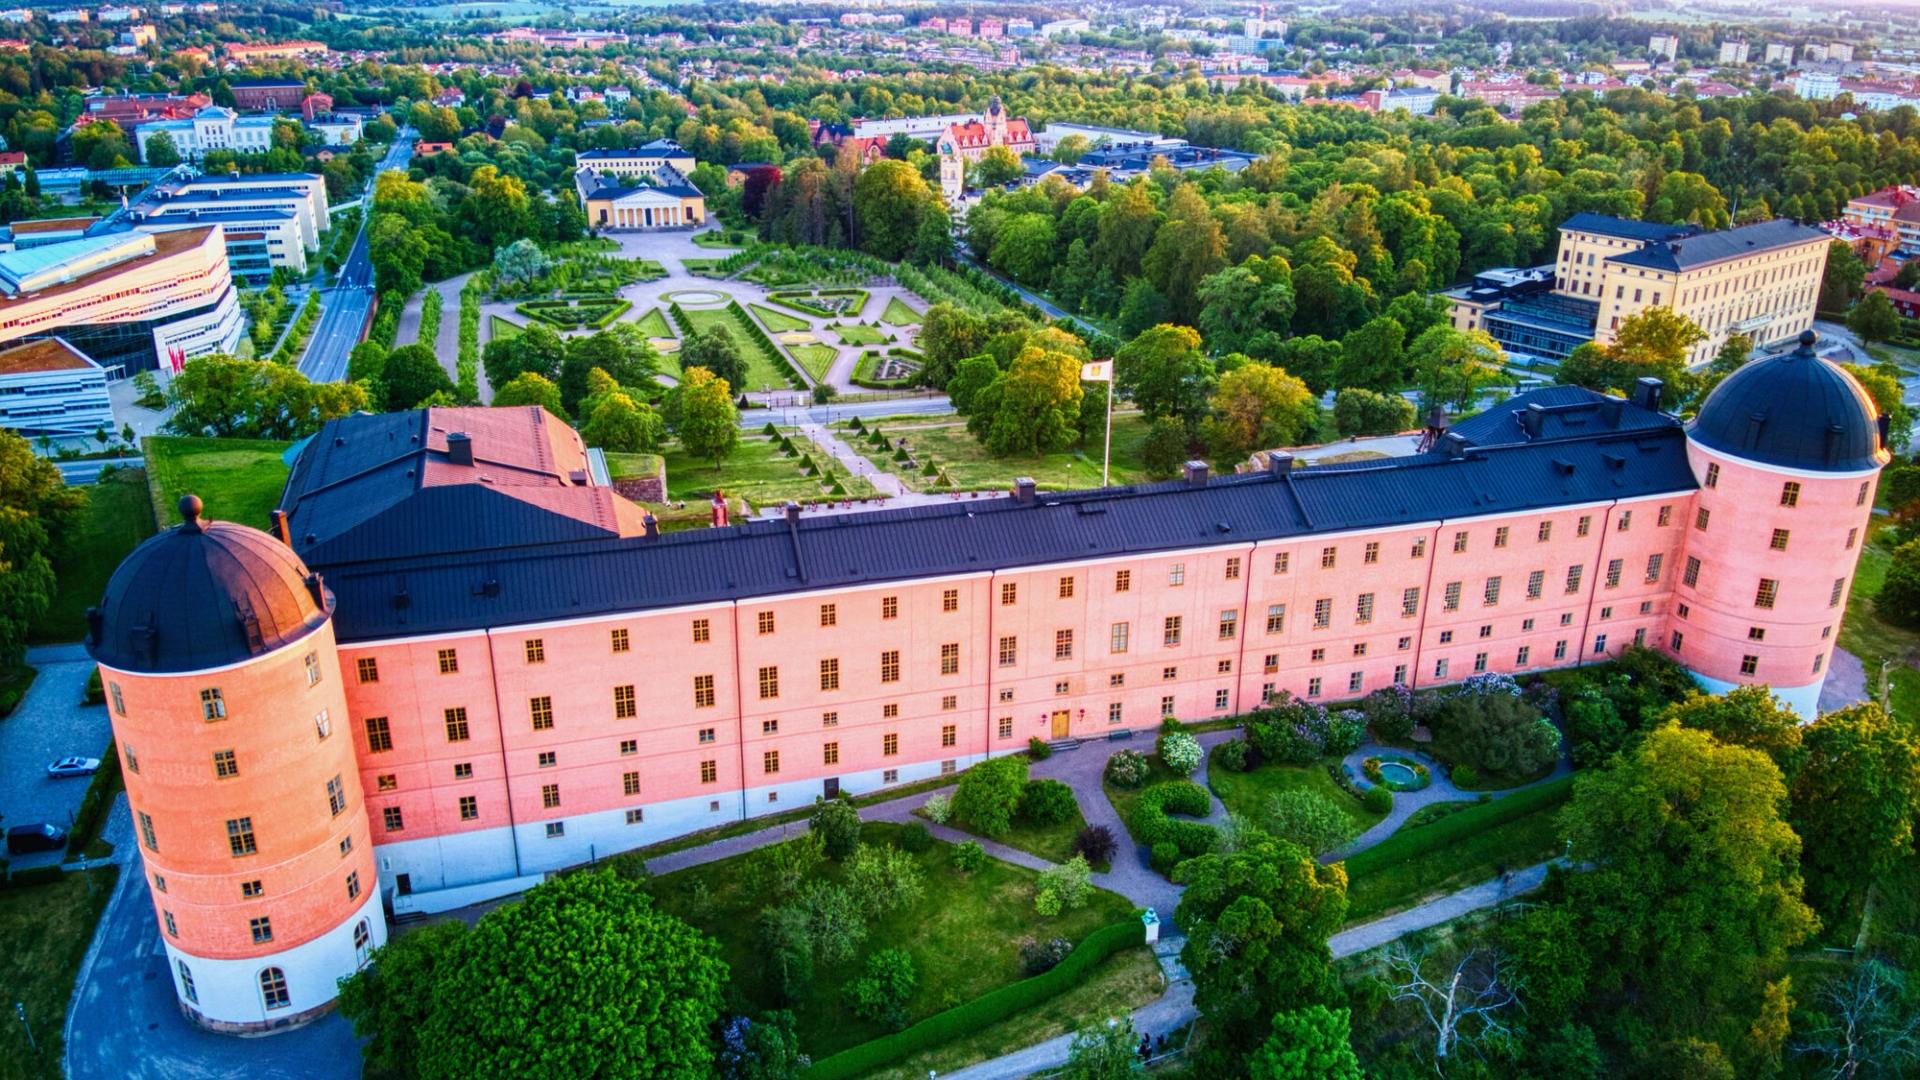 Aerial shot of Uppsala Castle in the later afternoon